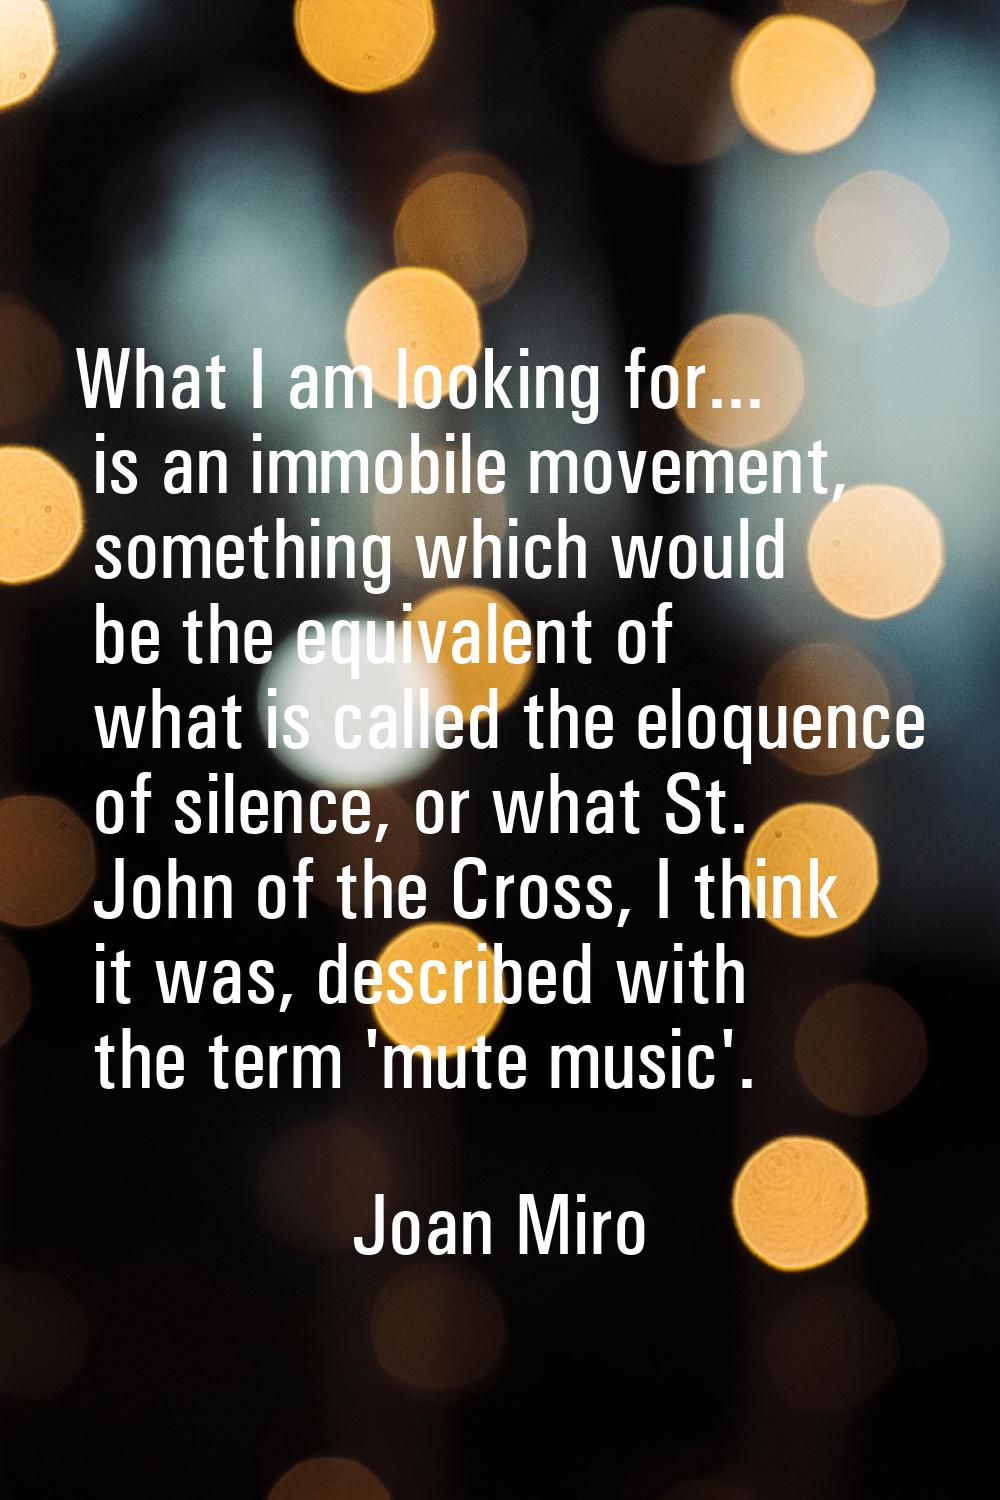 What I am looking for... is an immobile movement, something which would be the equivalent of what i